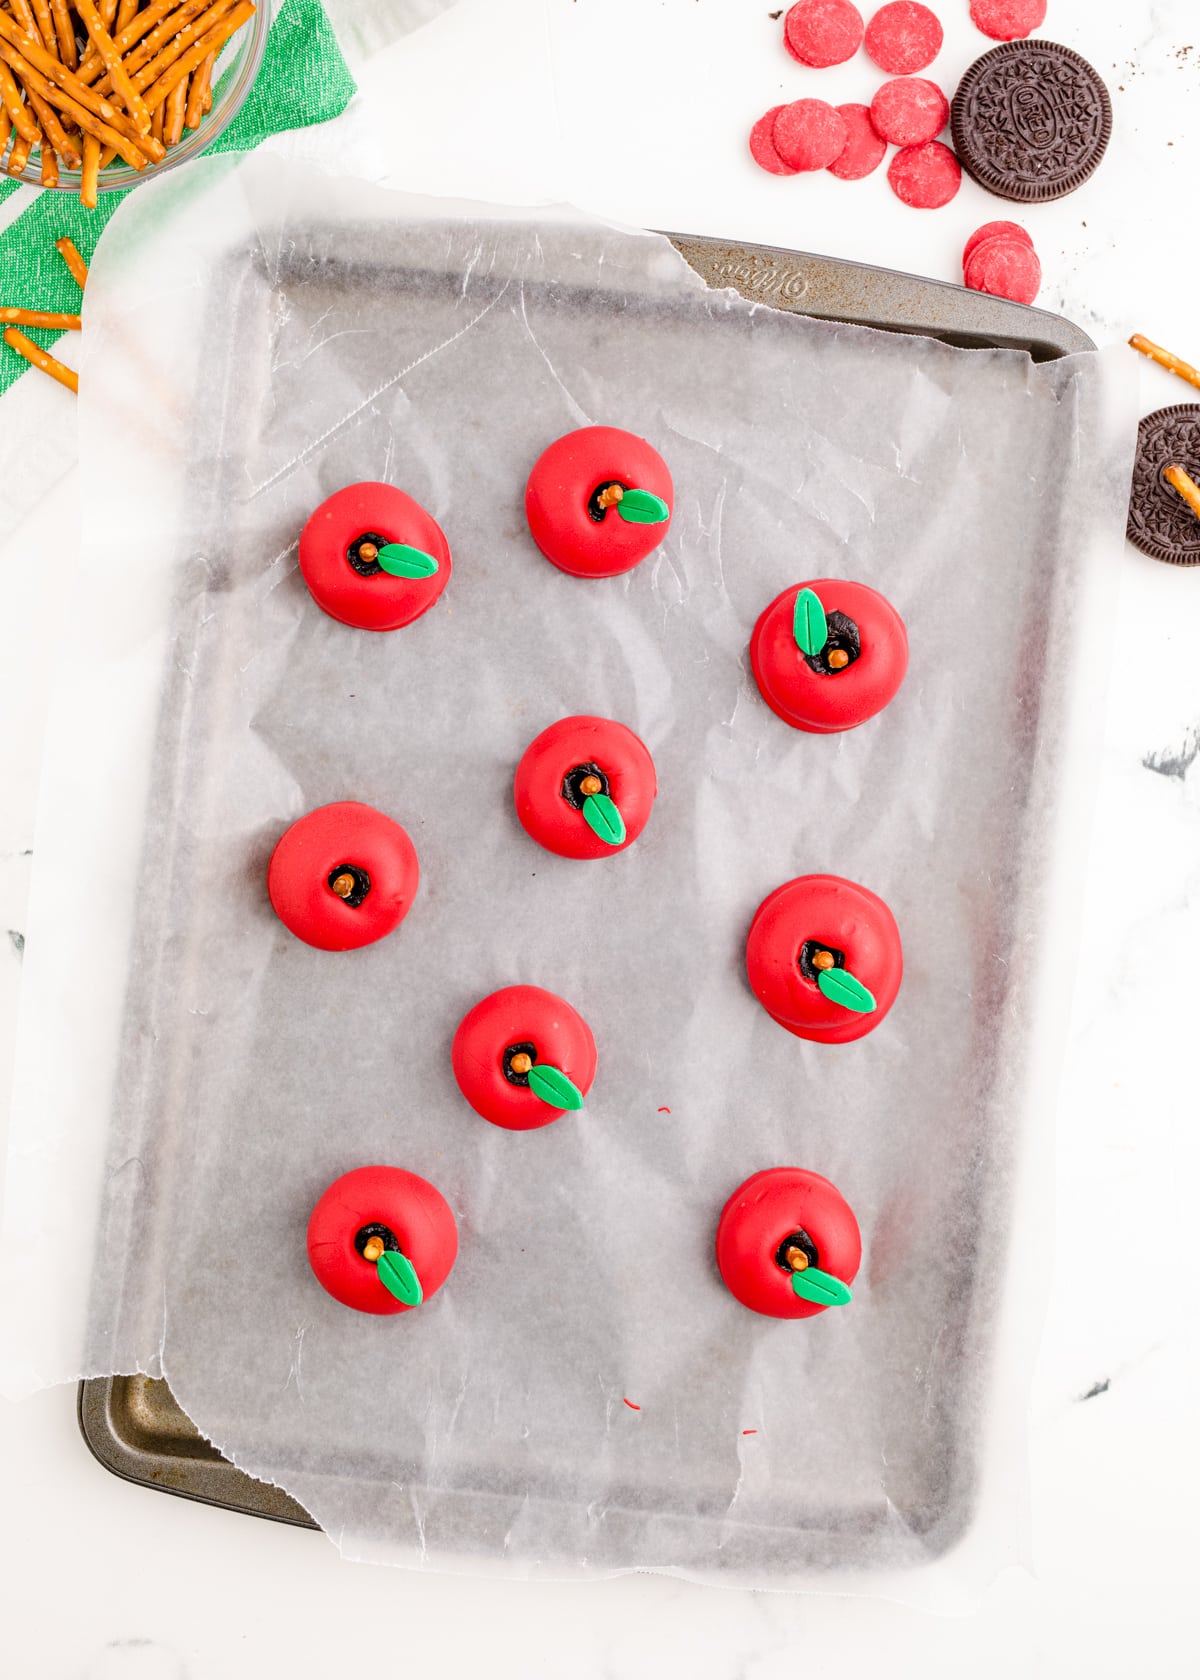 Apple oreo balls on a baking sheet lined with wax paper.